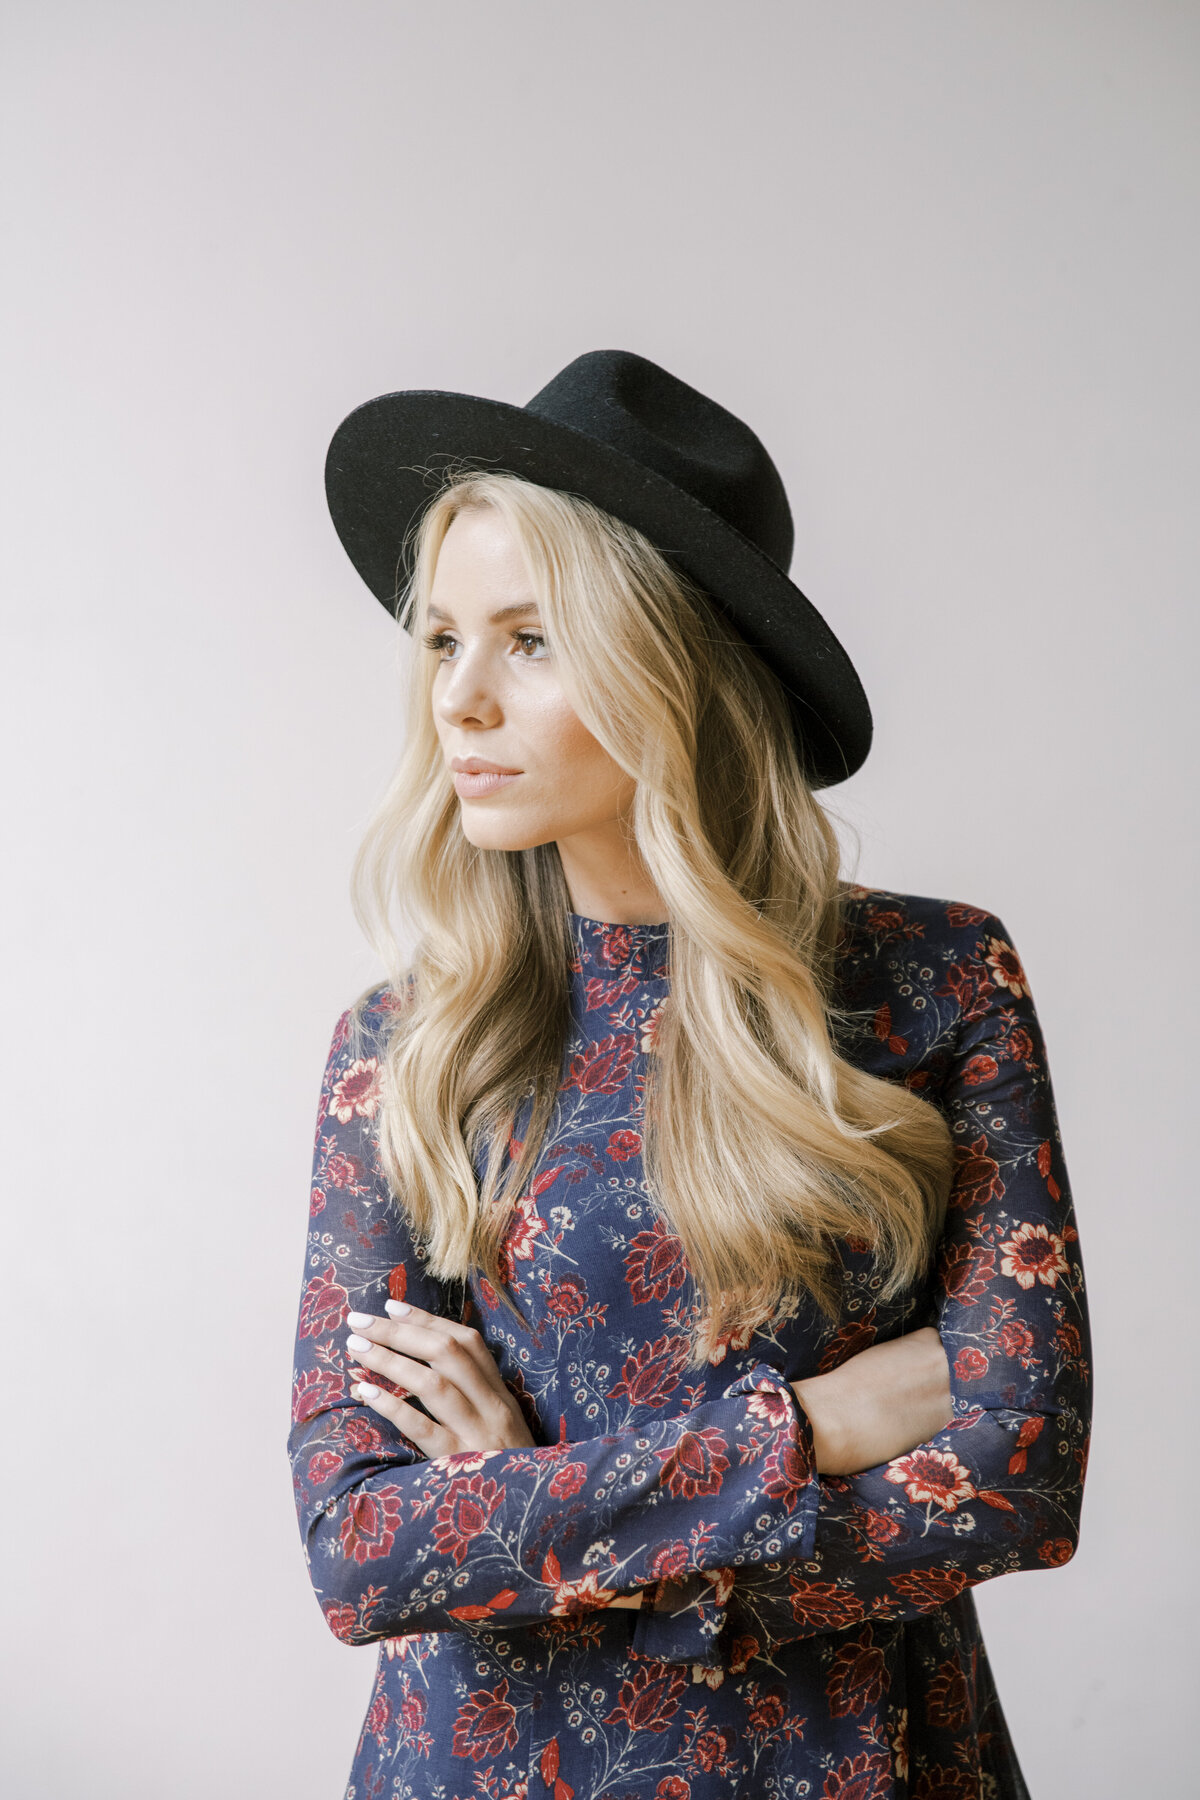 blond woman with black hat and floral top crossing her arms in front of her and looking off into the distance